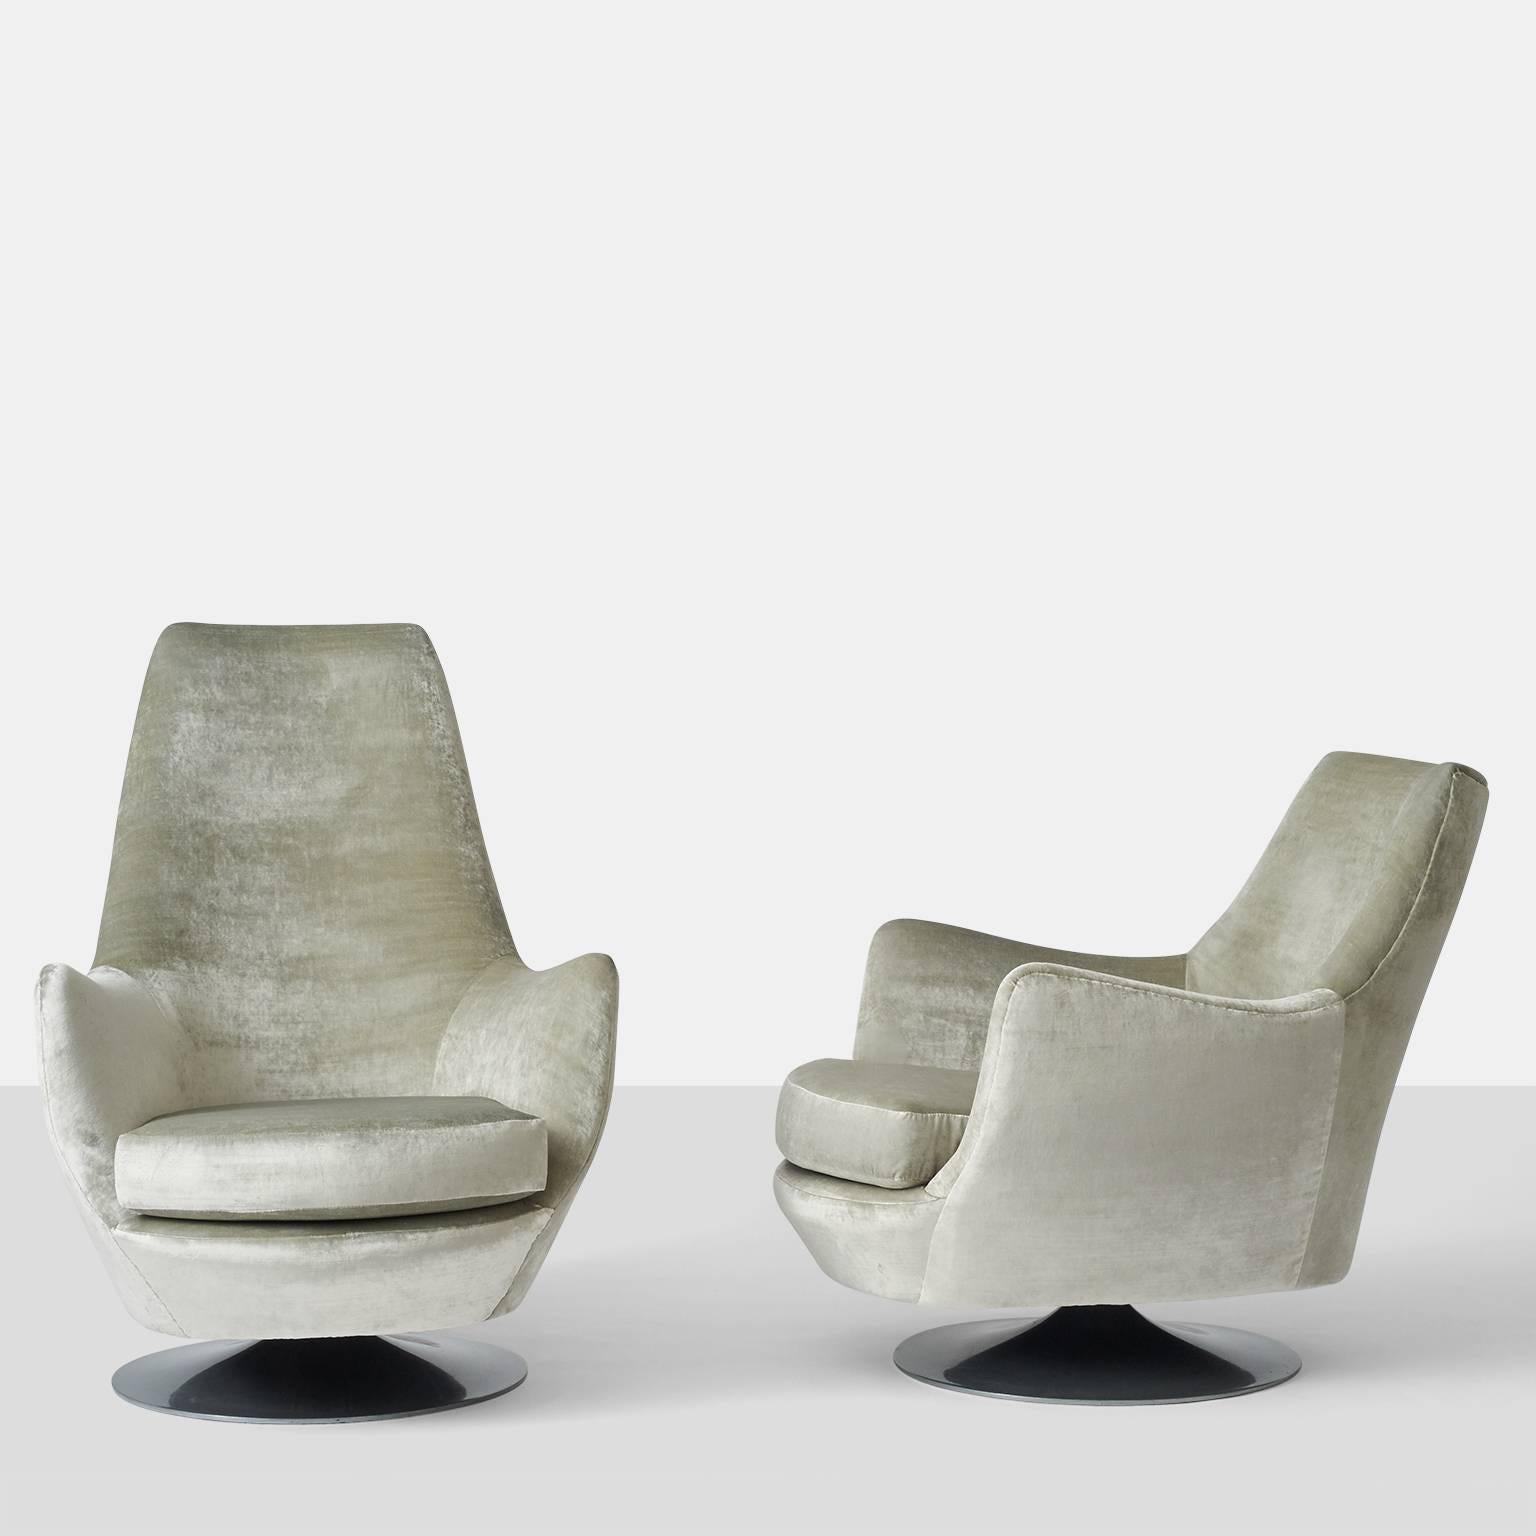 A pair of Milo Baughman his and hers swivel lounge chairs upholstered in a silver/gray toned velvet on a aluminum base.

Measurement for 